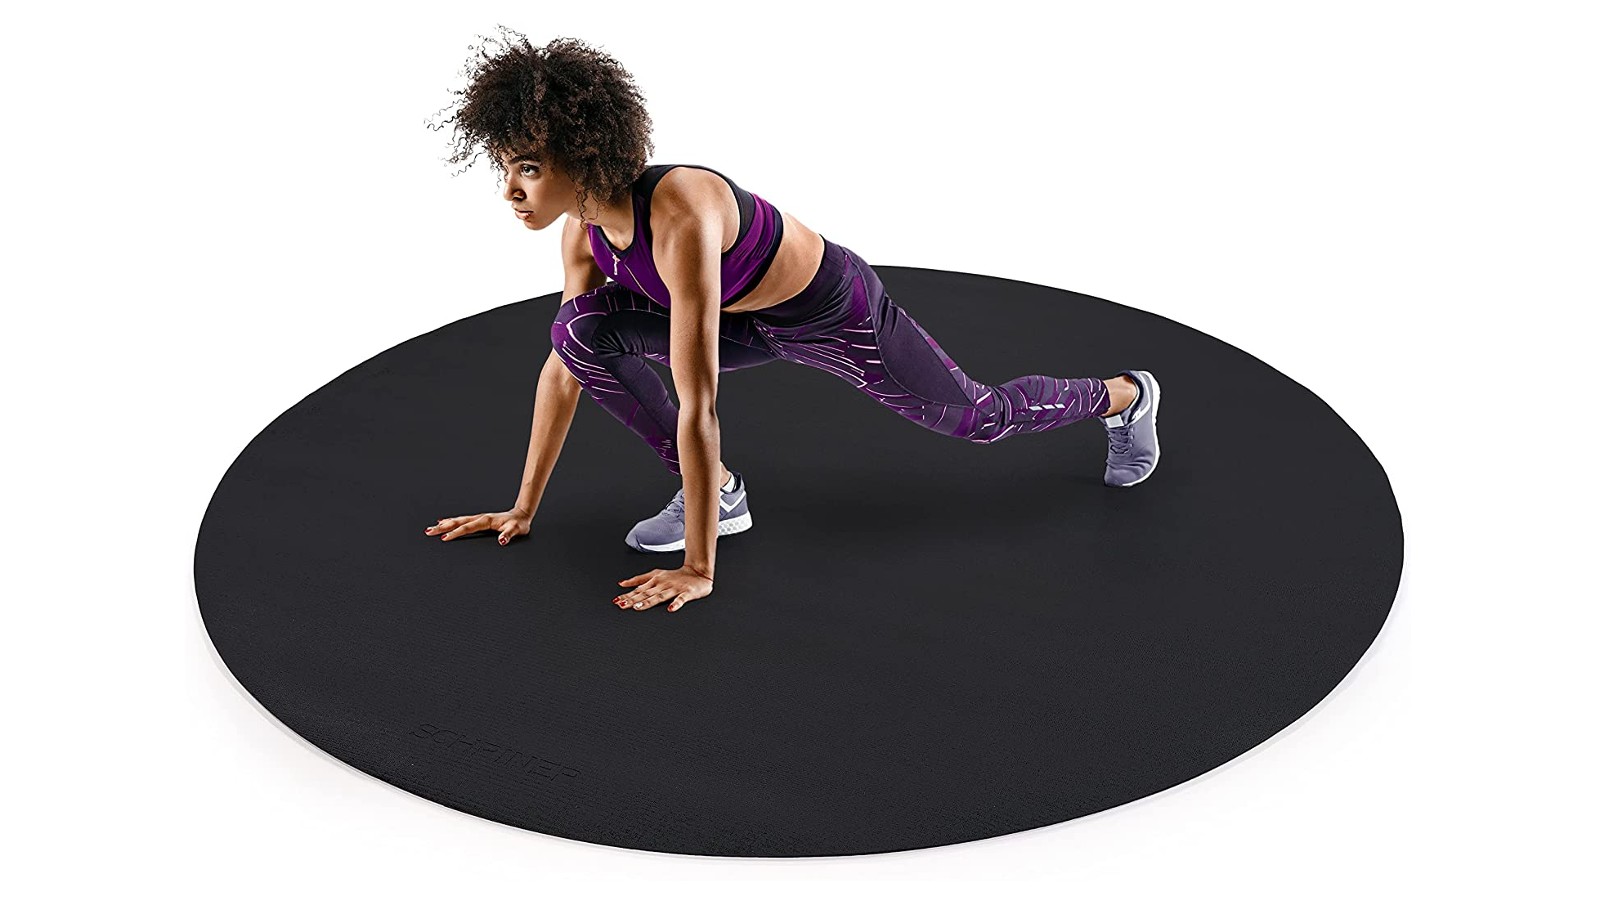 SCHRINER large round yoga mat (6 ft) with a woman practising yoga on it.